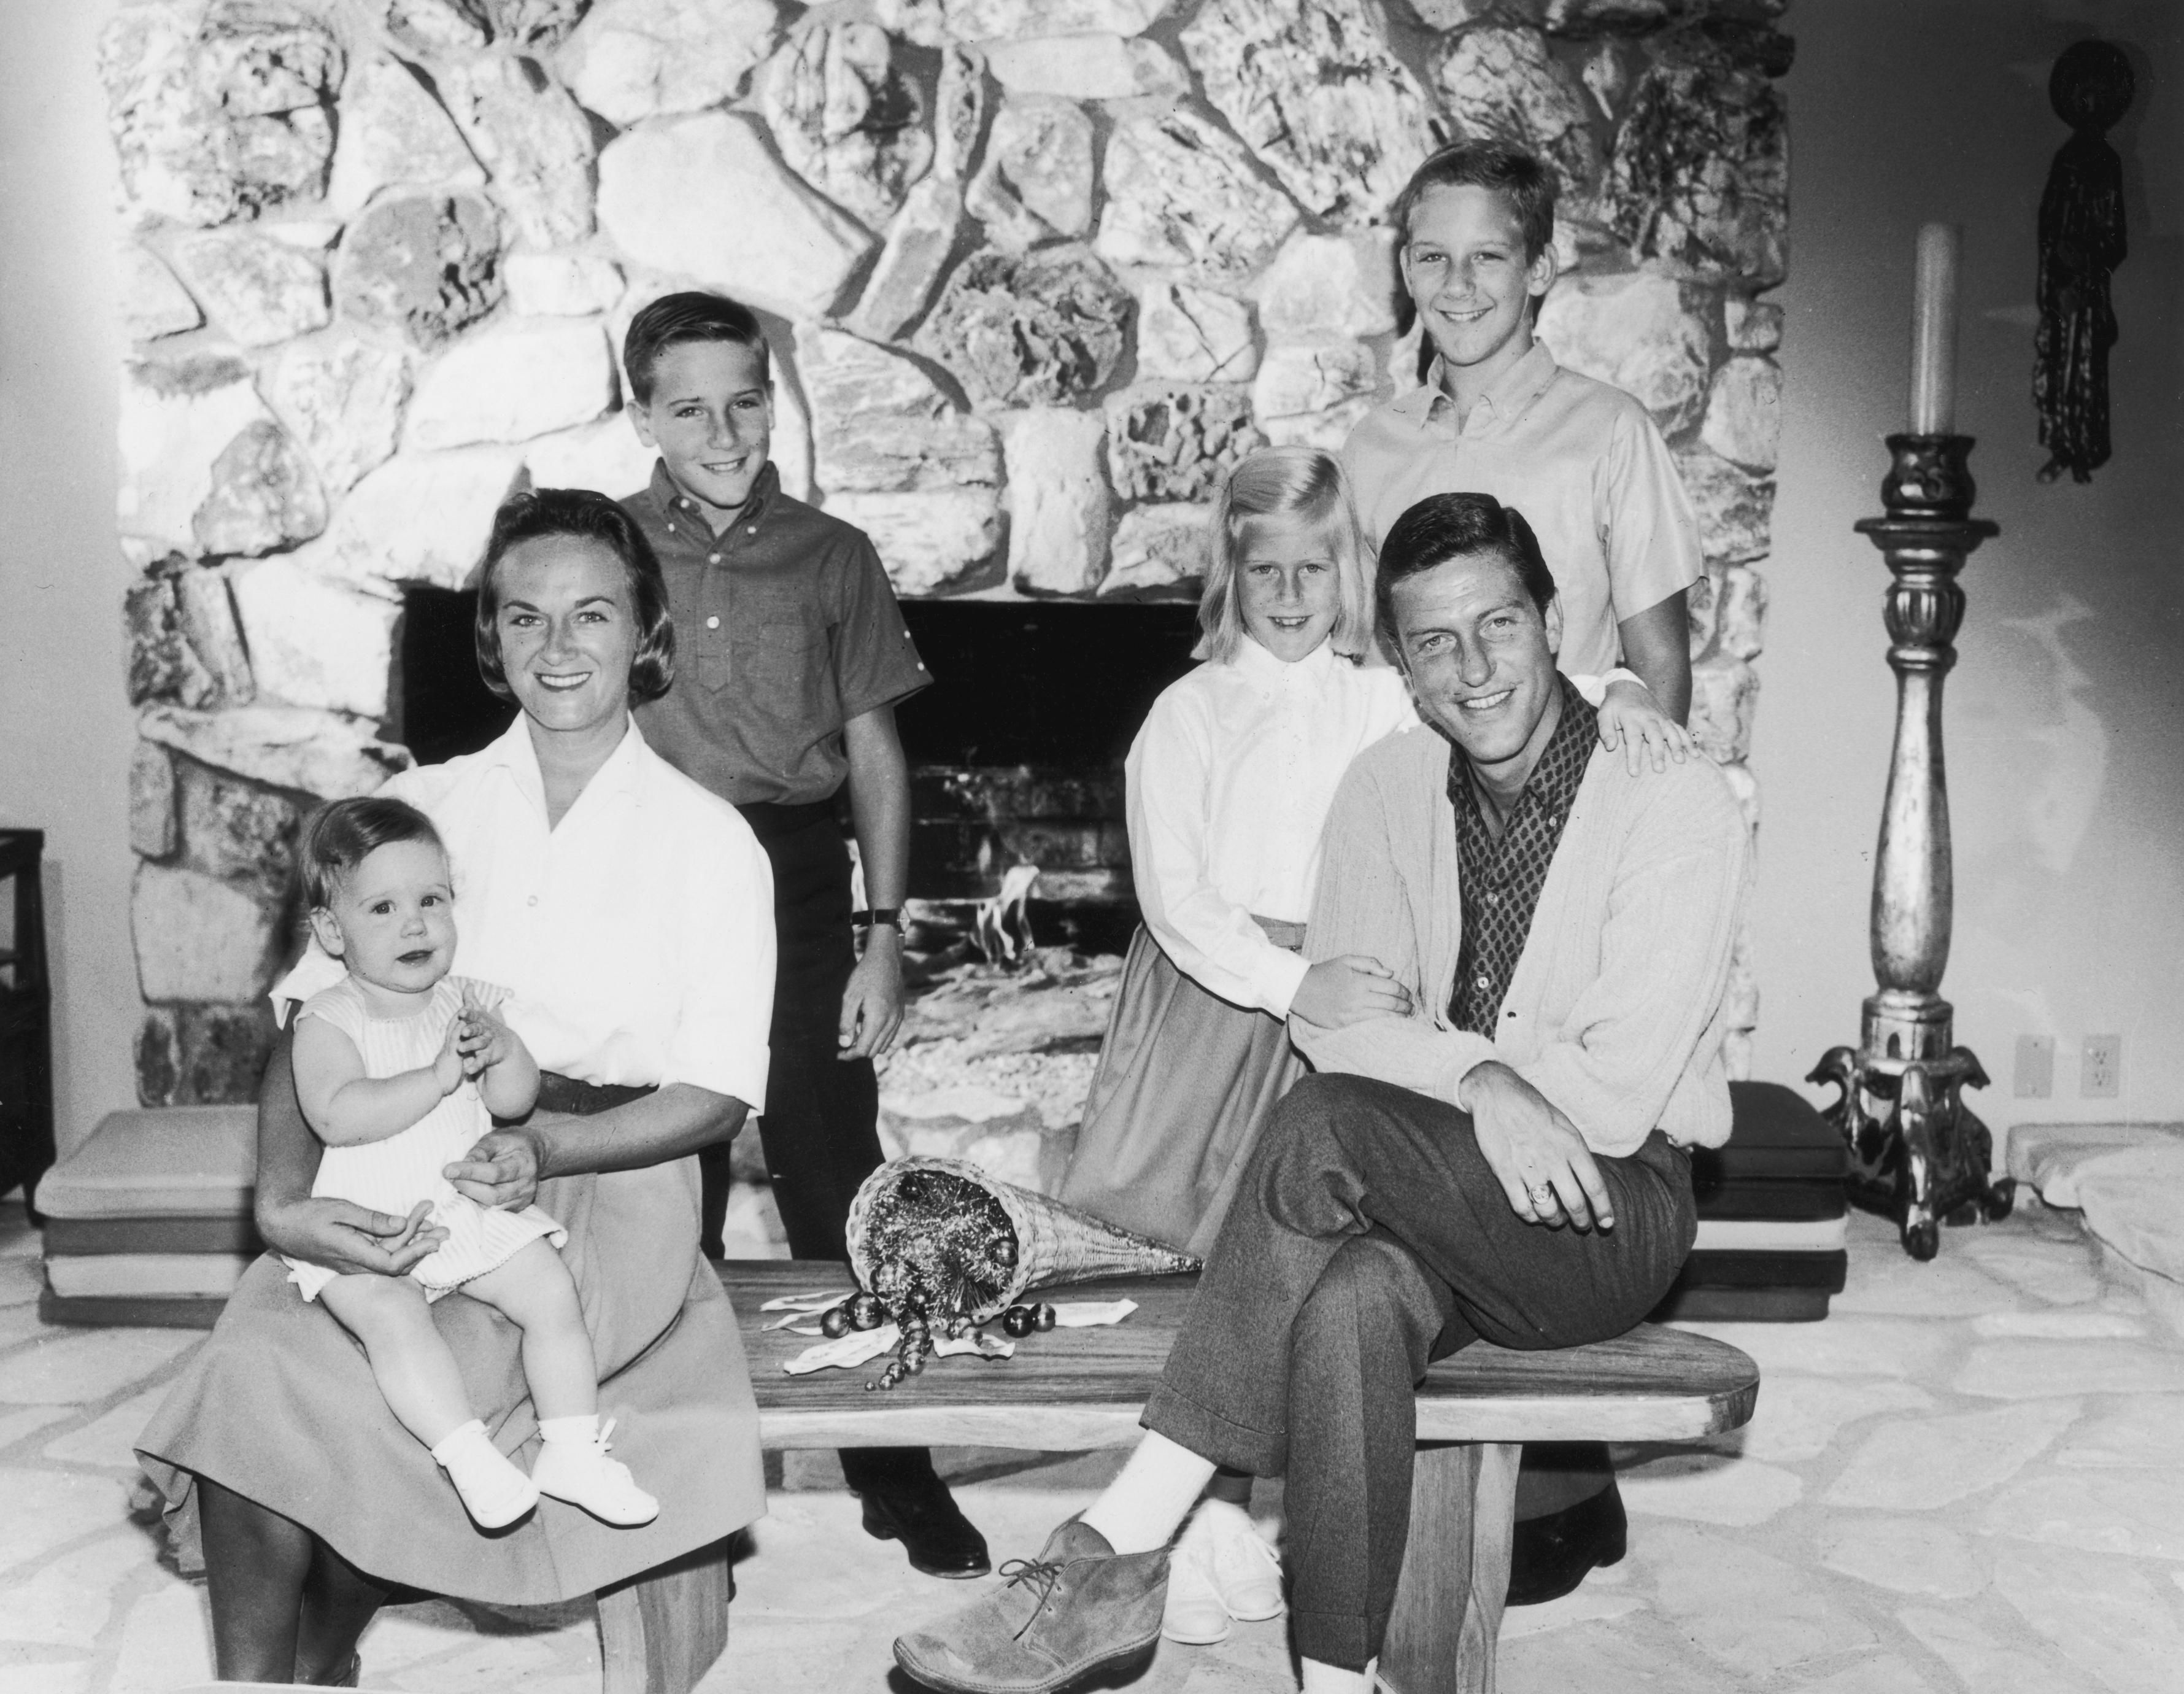 Comedian Dick Van Dyke and Margie Willet photographed with their four children, Barry, Carrie, Chris, and Stacey, on January 1, 1965 | Source: Getty Images